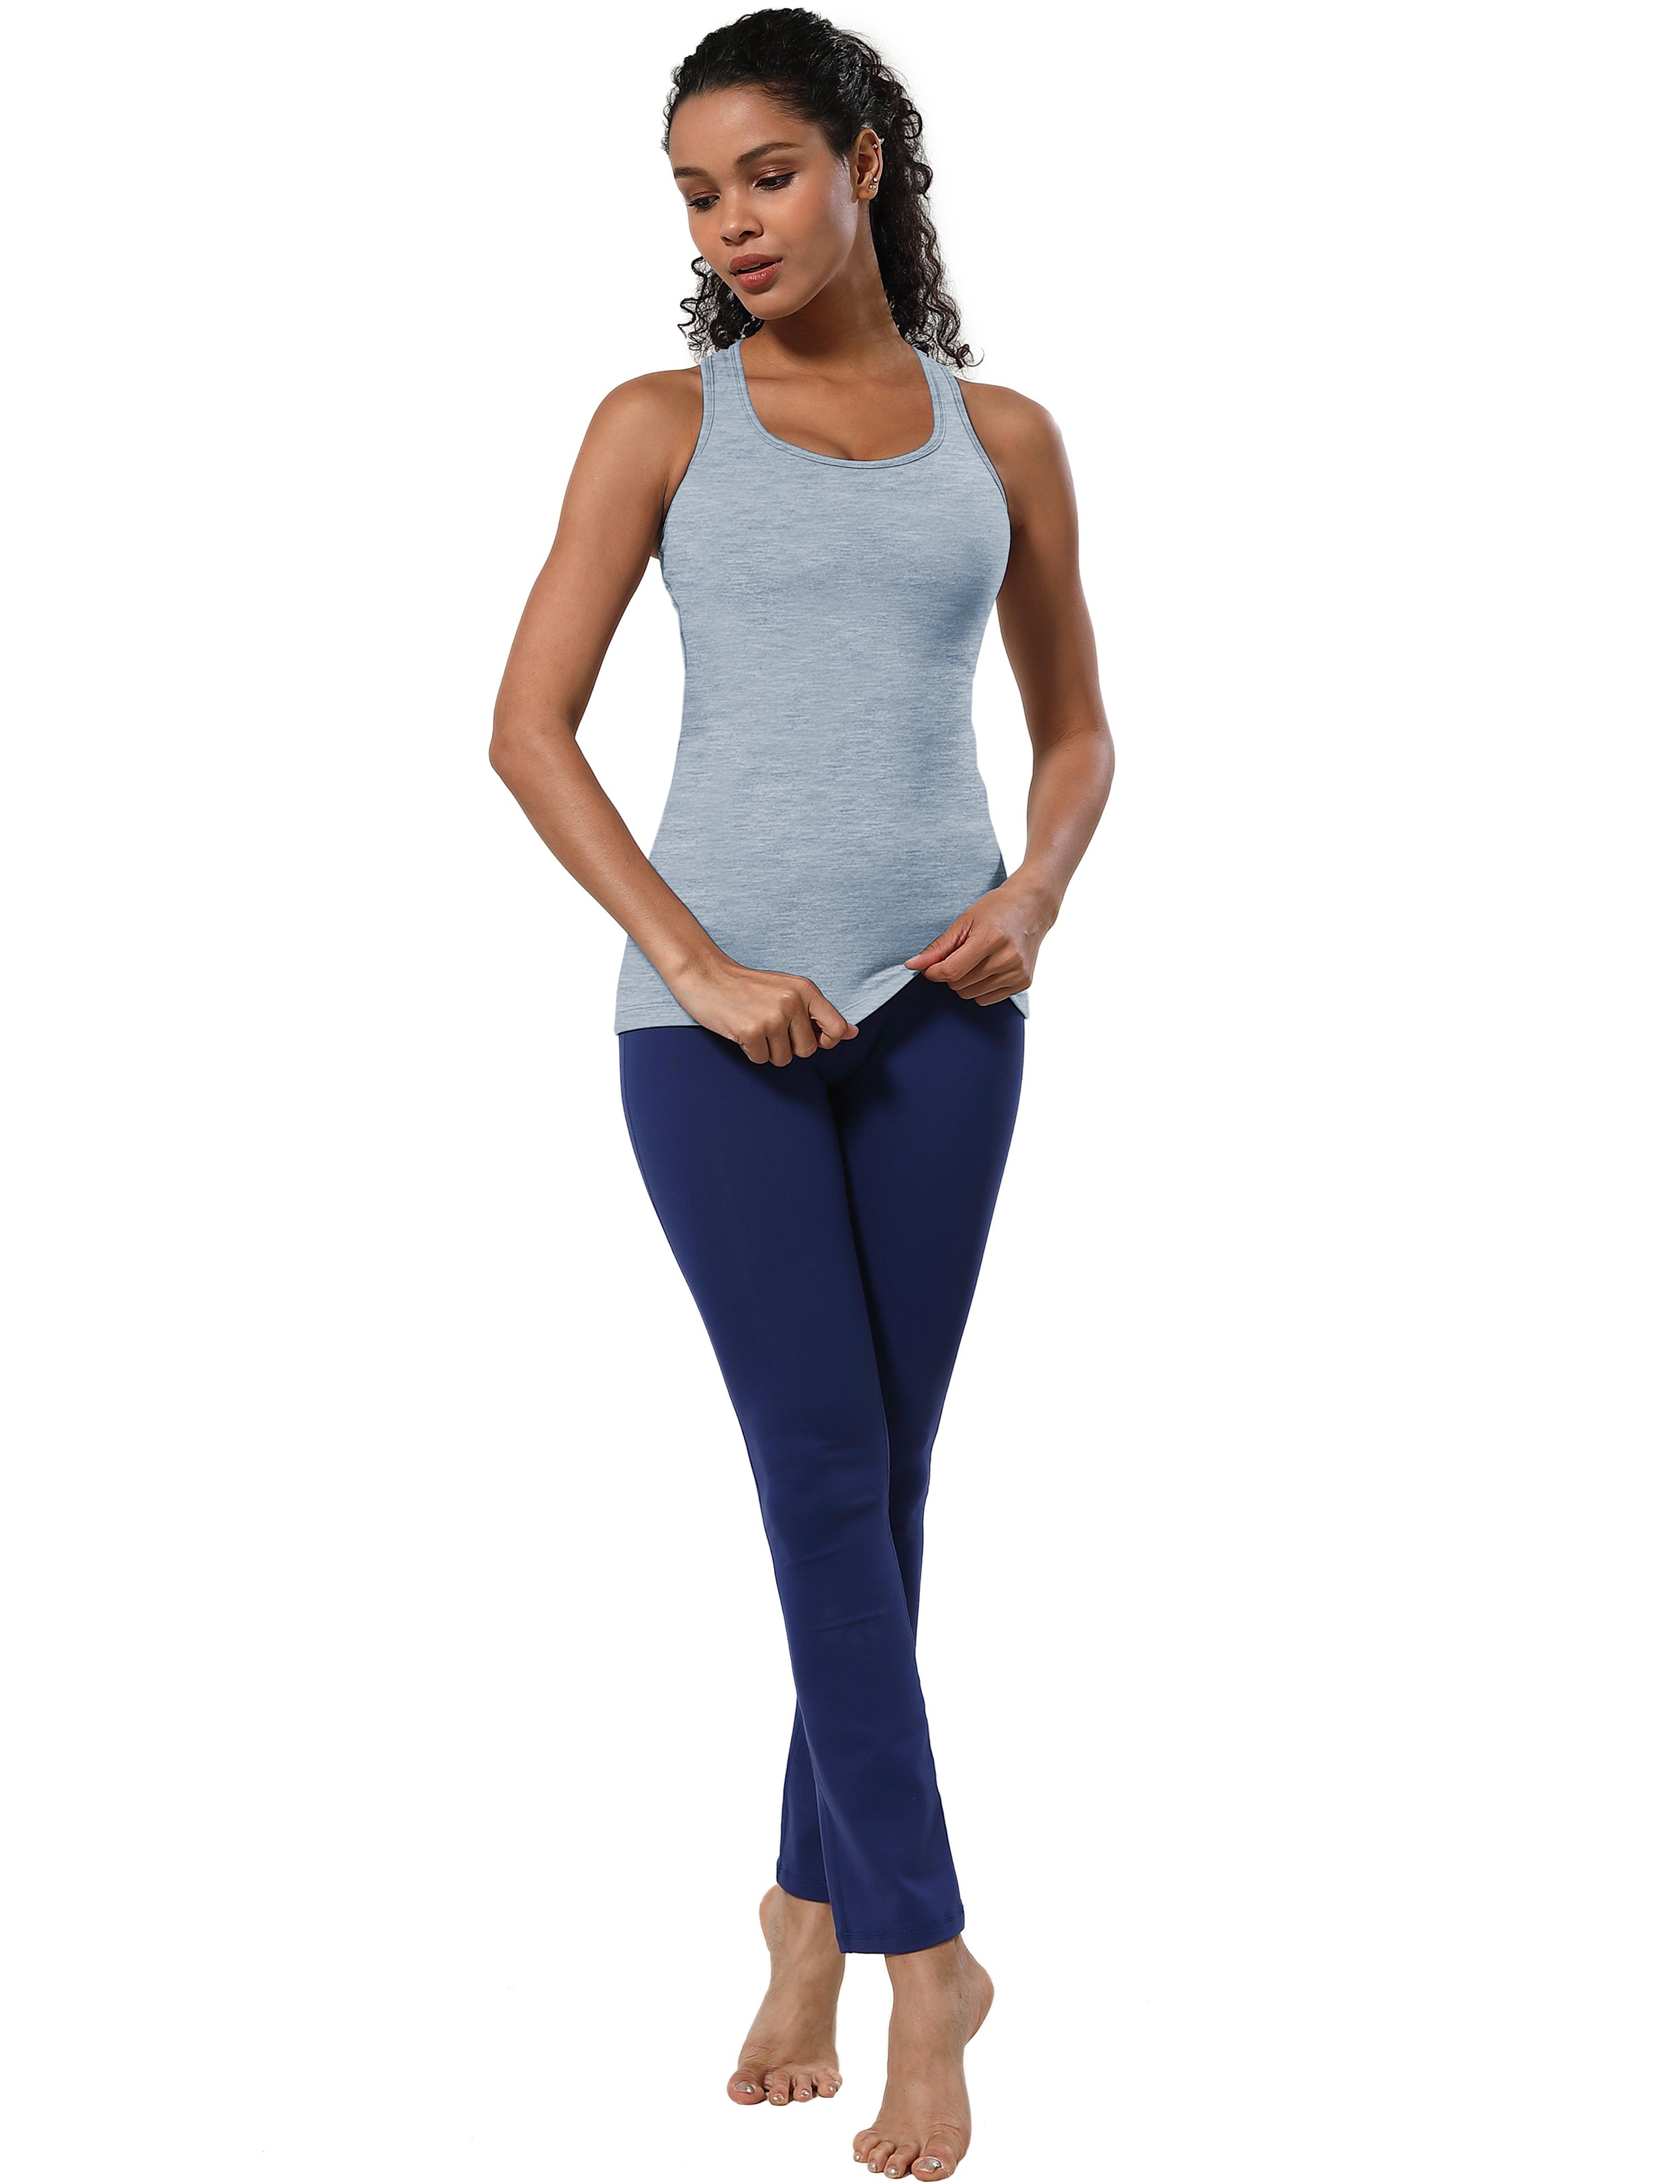 Racerback Athletic Tank Tops heatherblue 92%Nylon/8%Spandex(Cotton Soft) Designed for Yoga Tight Fit So buttery soft, it feels weightless Sweat-wicking Four-way stretch Breathable Contours your body Sits below the waistband for moderate, everyday coverage